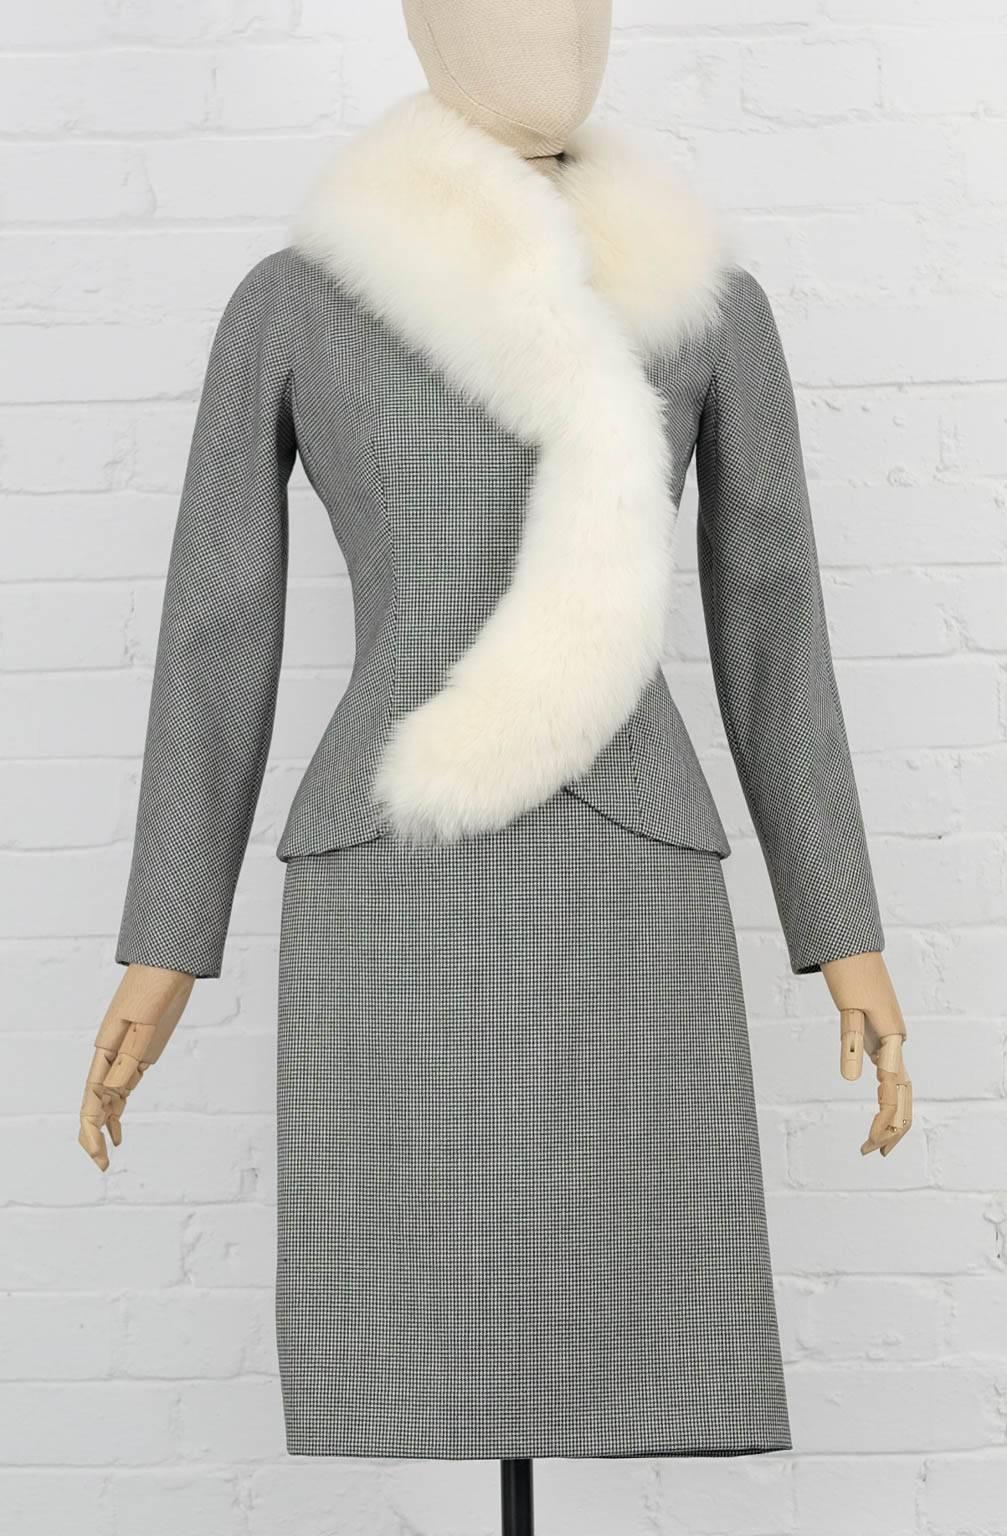 Wool houndstooth fox fur skirt suit from Christian Dior by John Galliano featuring a fitted jacket with removable fox fur collar and a fitted pencil skirt with rear button details. 

Shoulder to shoulder 50cm

circa 1990s